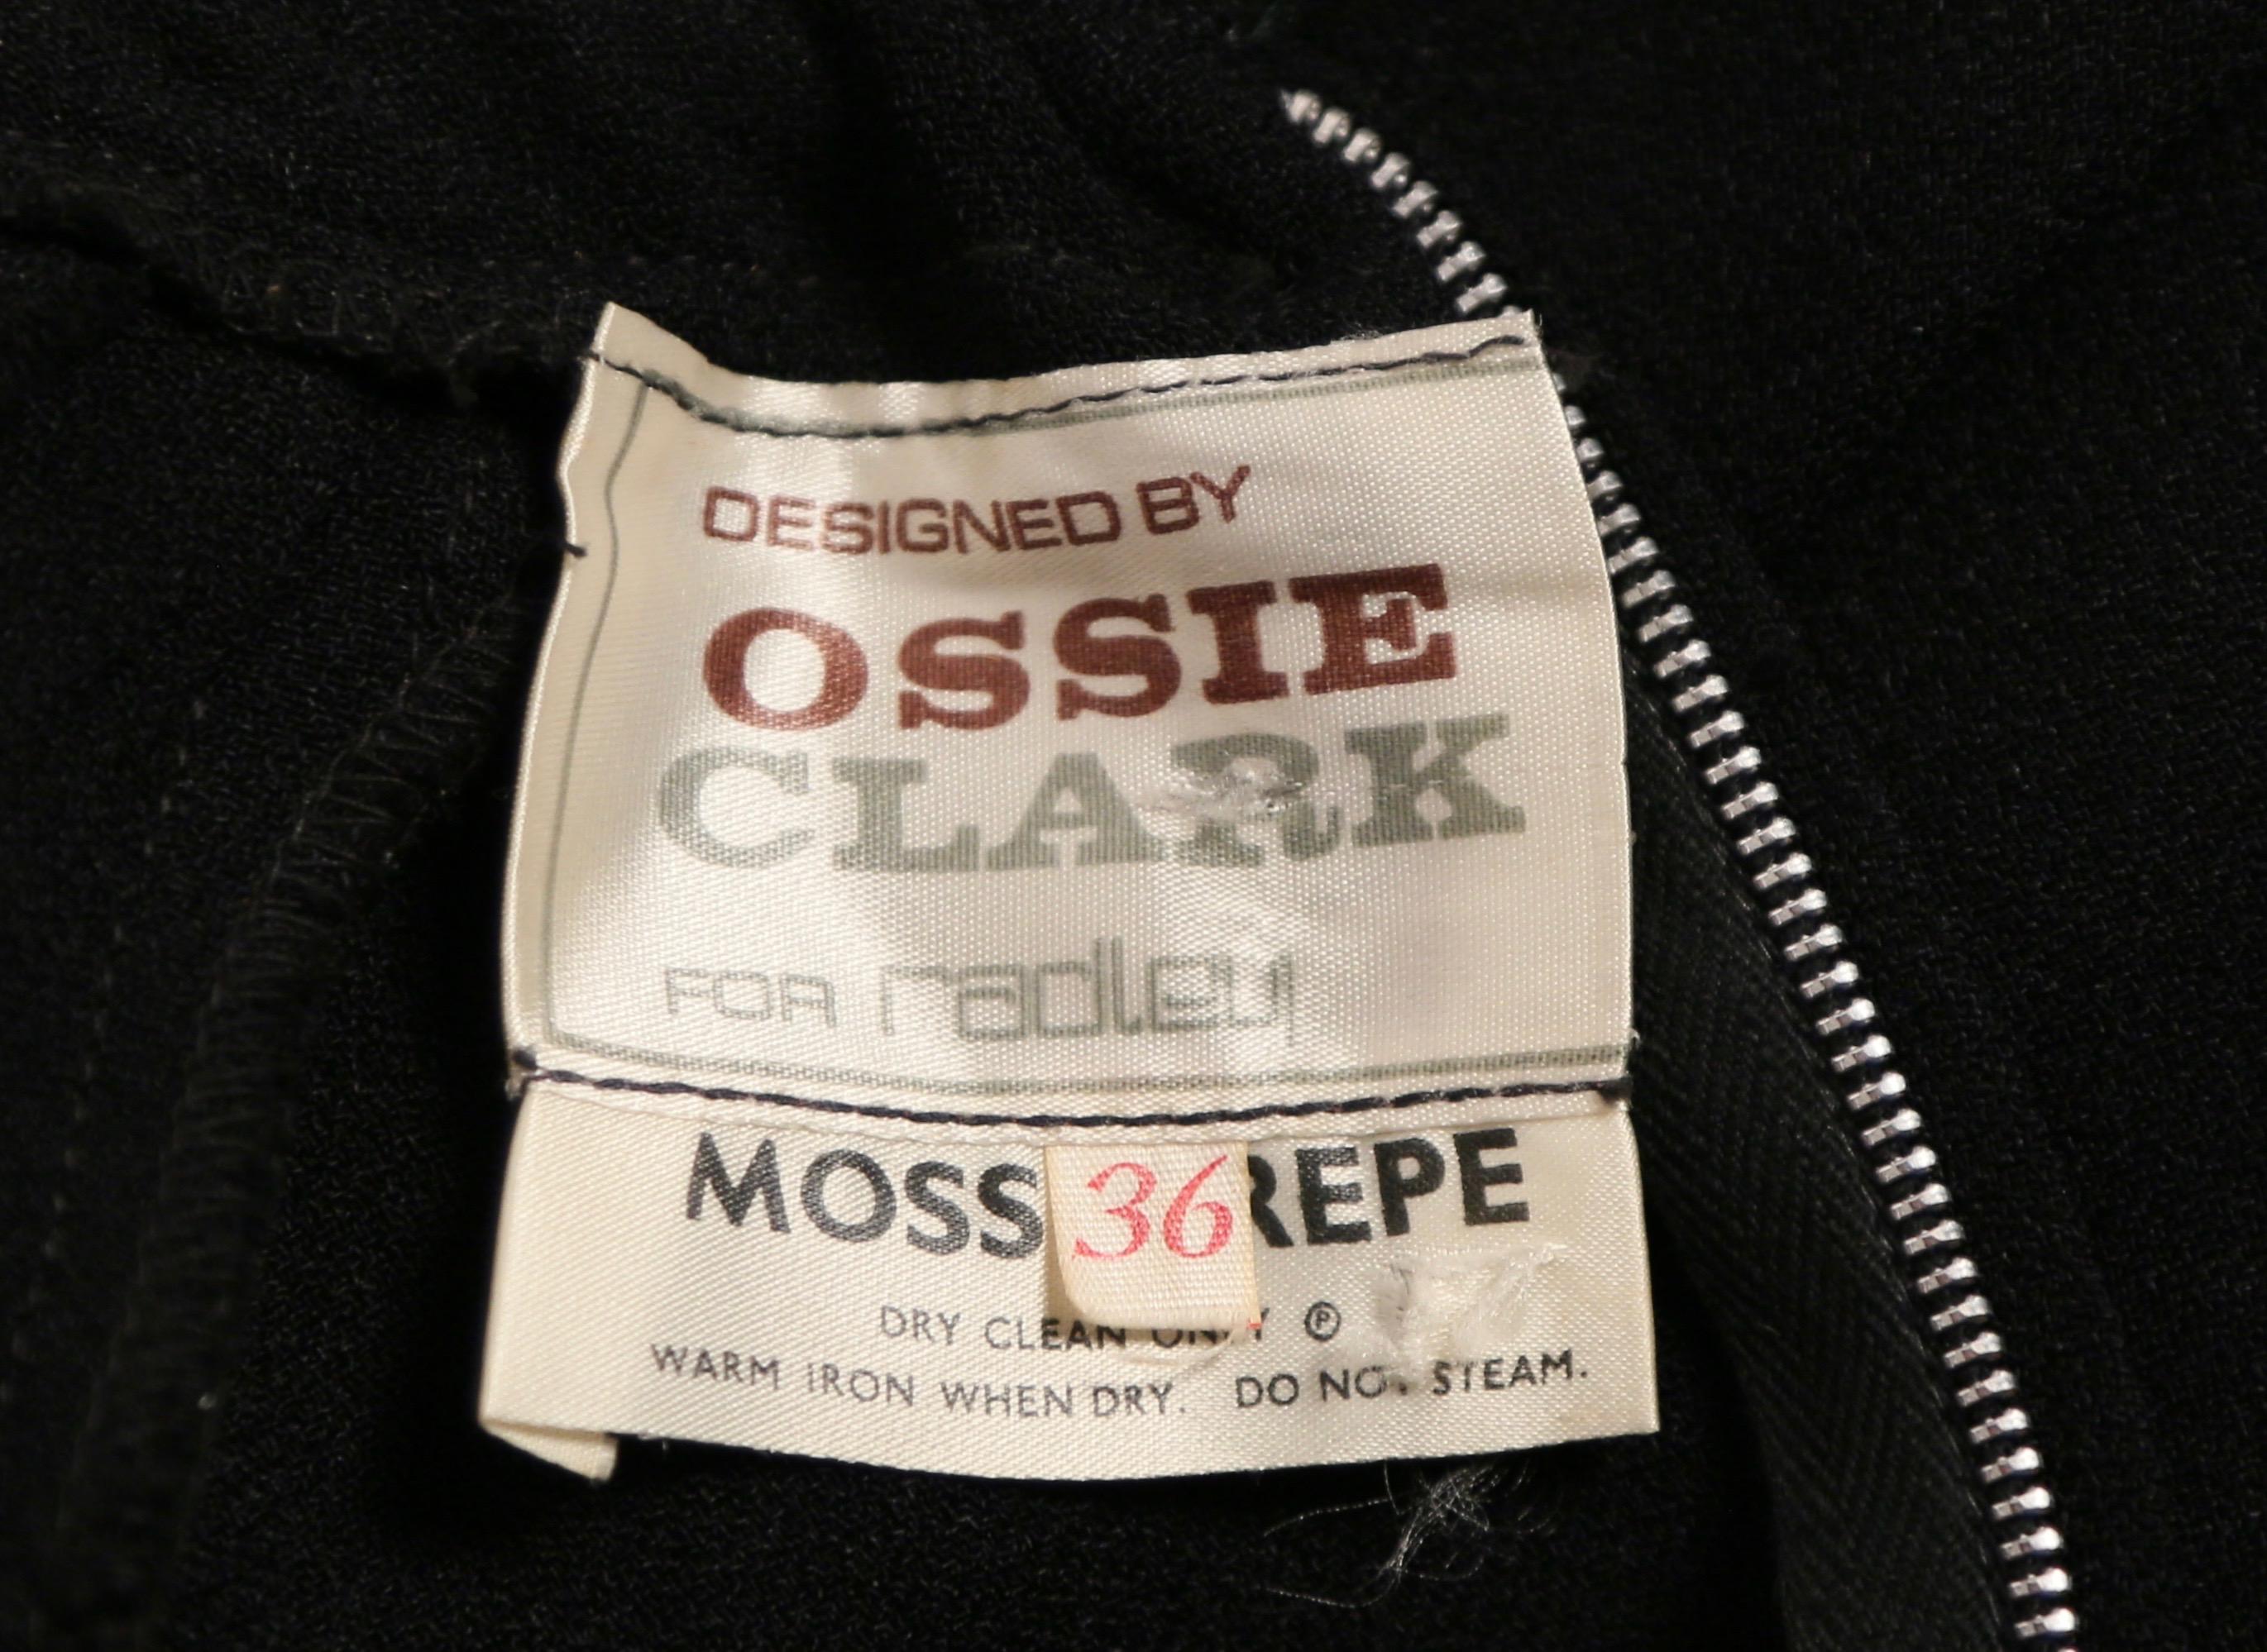 1970's OSSIE CLARK black moss crepe dress with keyhole neck and embroidery 2